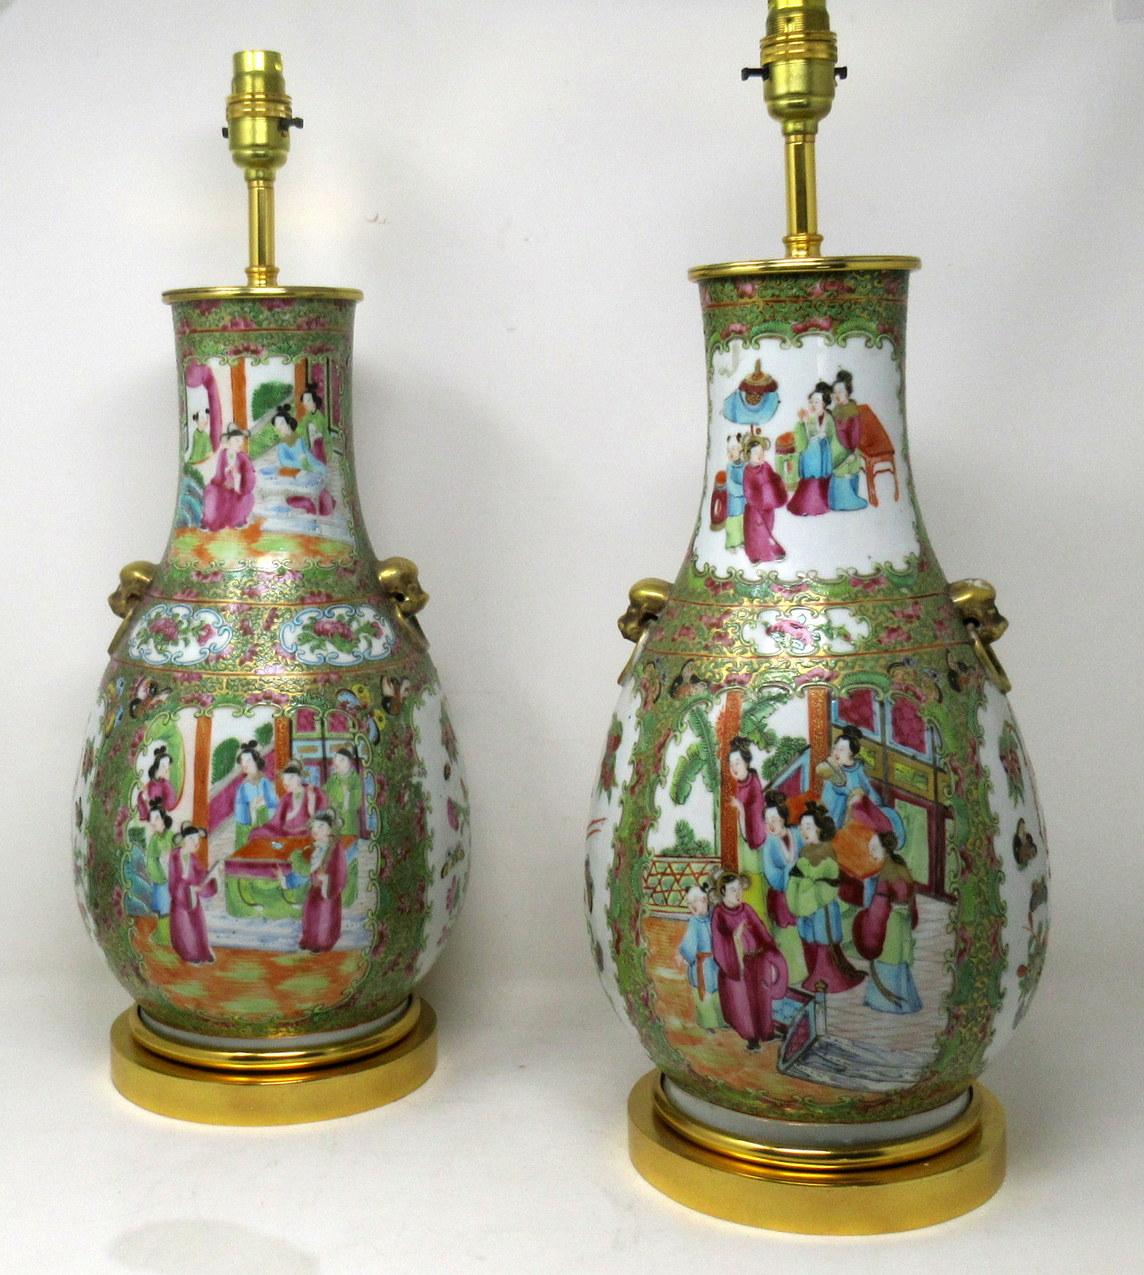 An exceptionally fine pair of Chinese Cantonese hand decorated porcelain oil lamps with ornate Ormolu bases now converted to Electric Table Lamps, of good size proportions, (see last image in situ) mid Nineteenth Century. 

The main outer bodies of